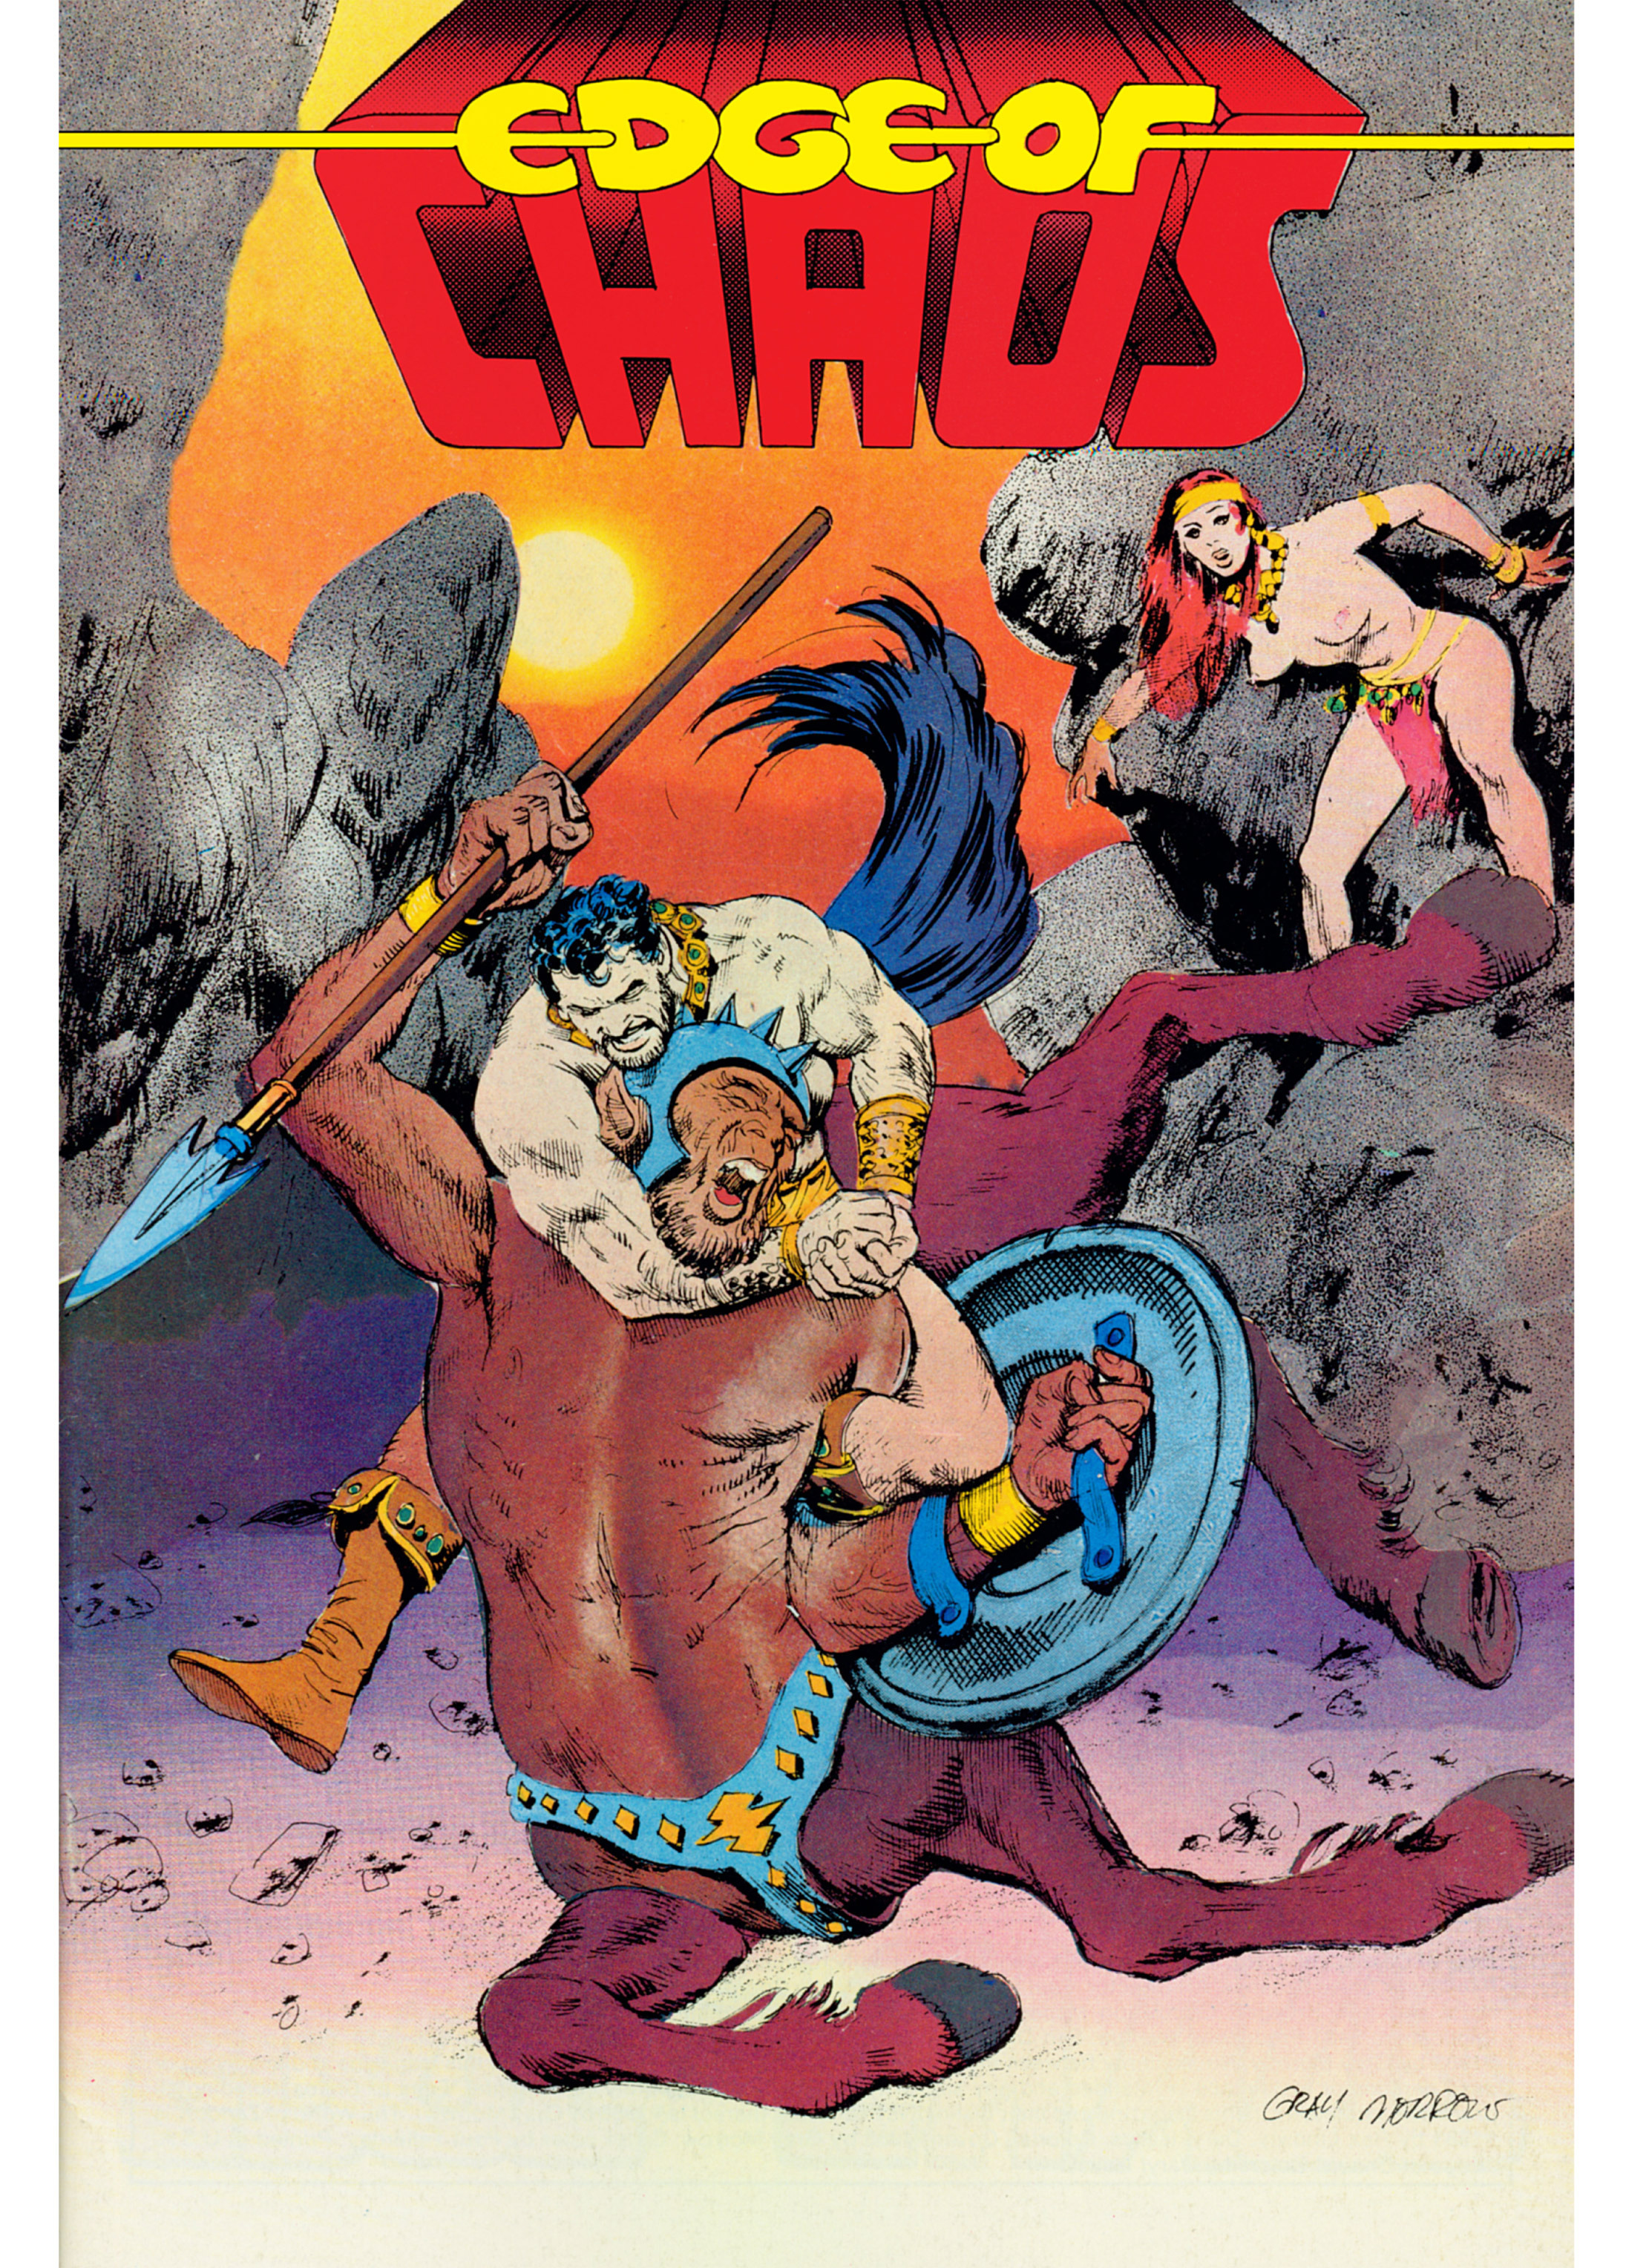 Read online Orion and Edge of Chaos comic -  Issue # TPB - 123